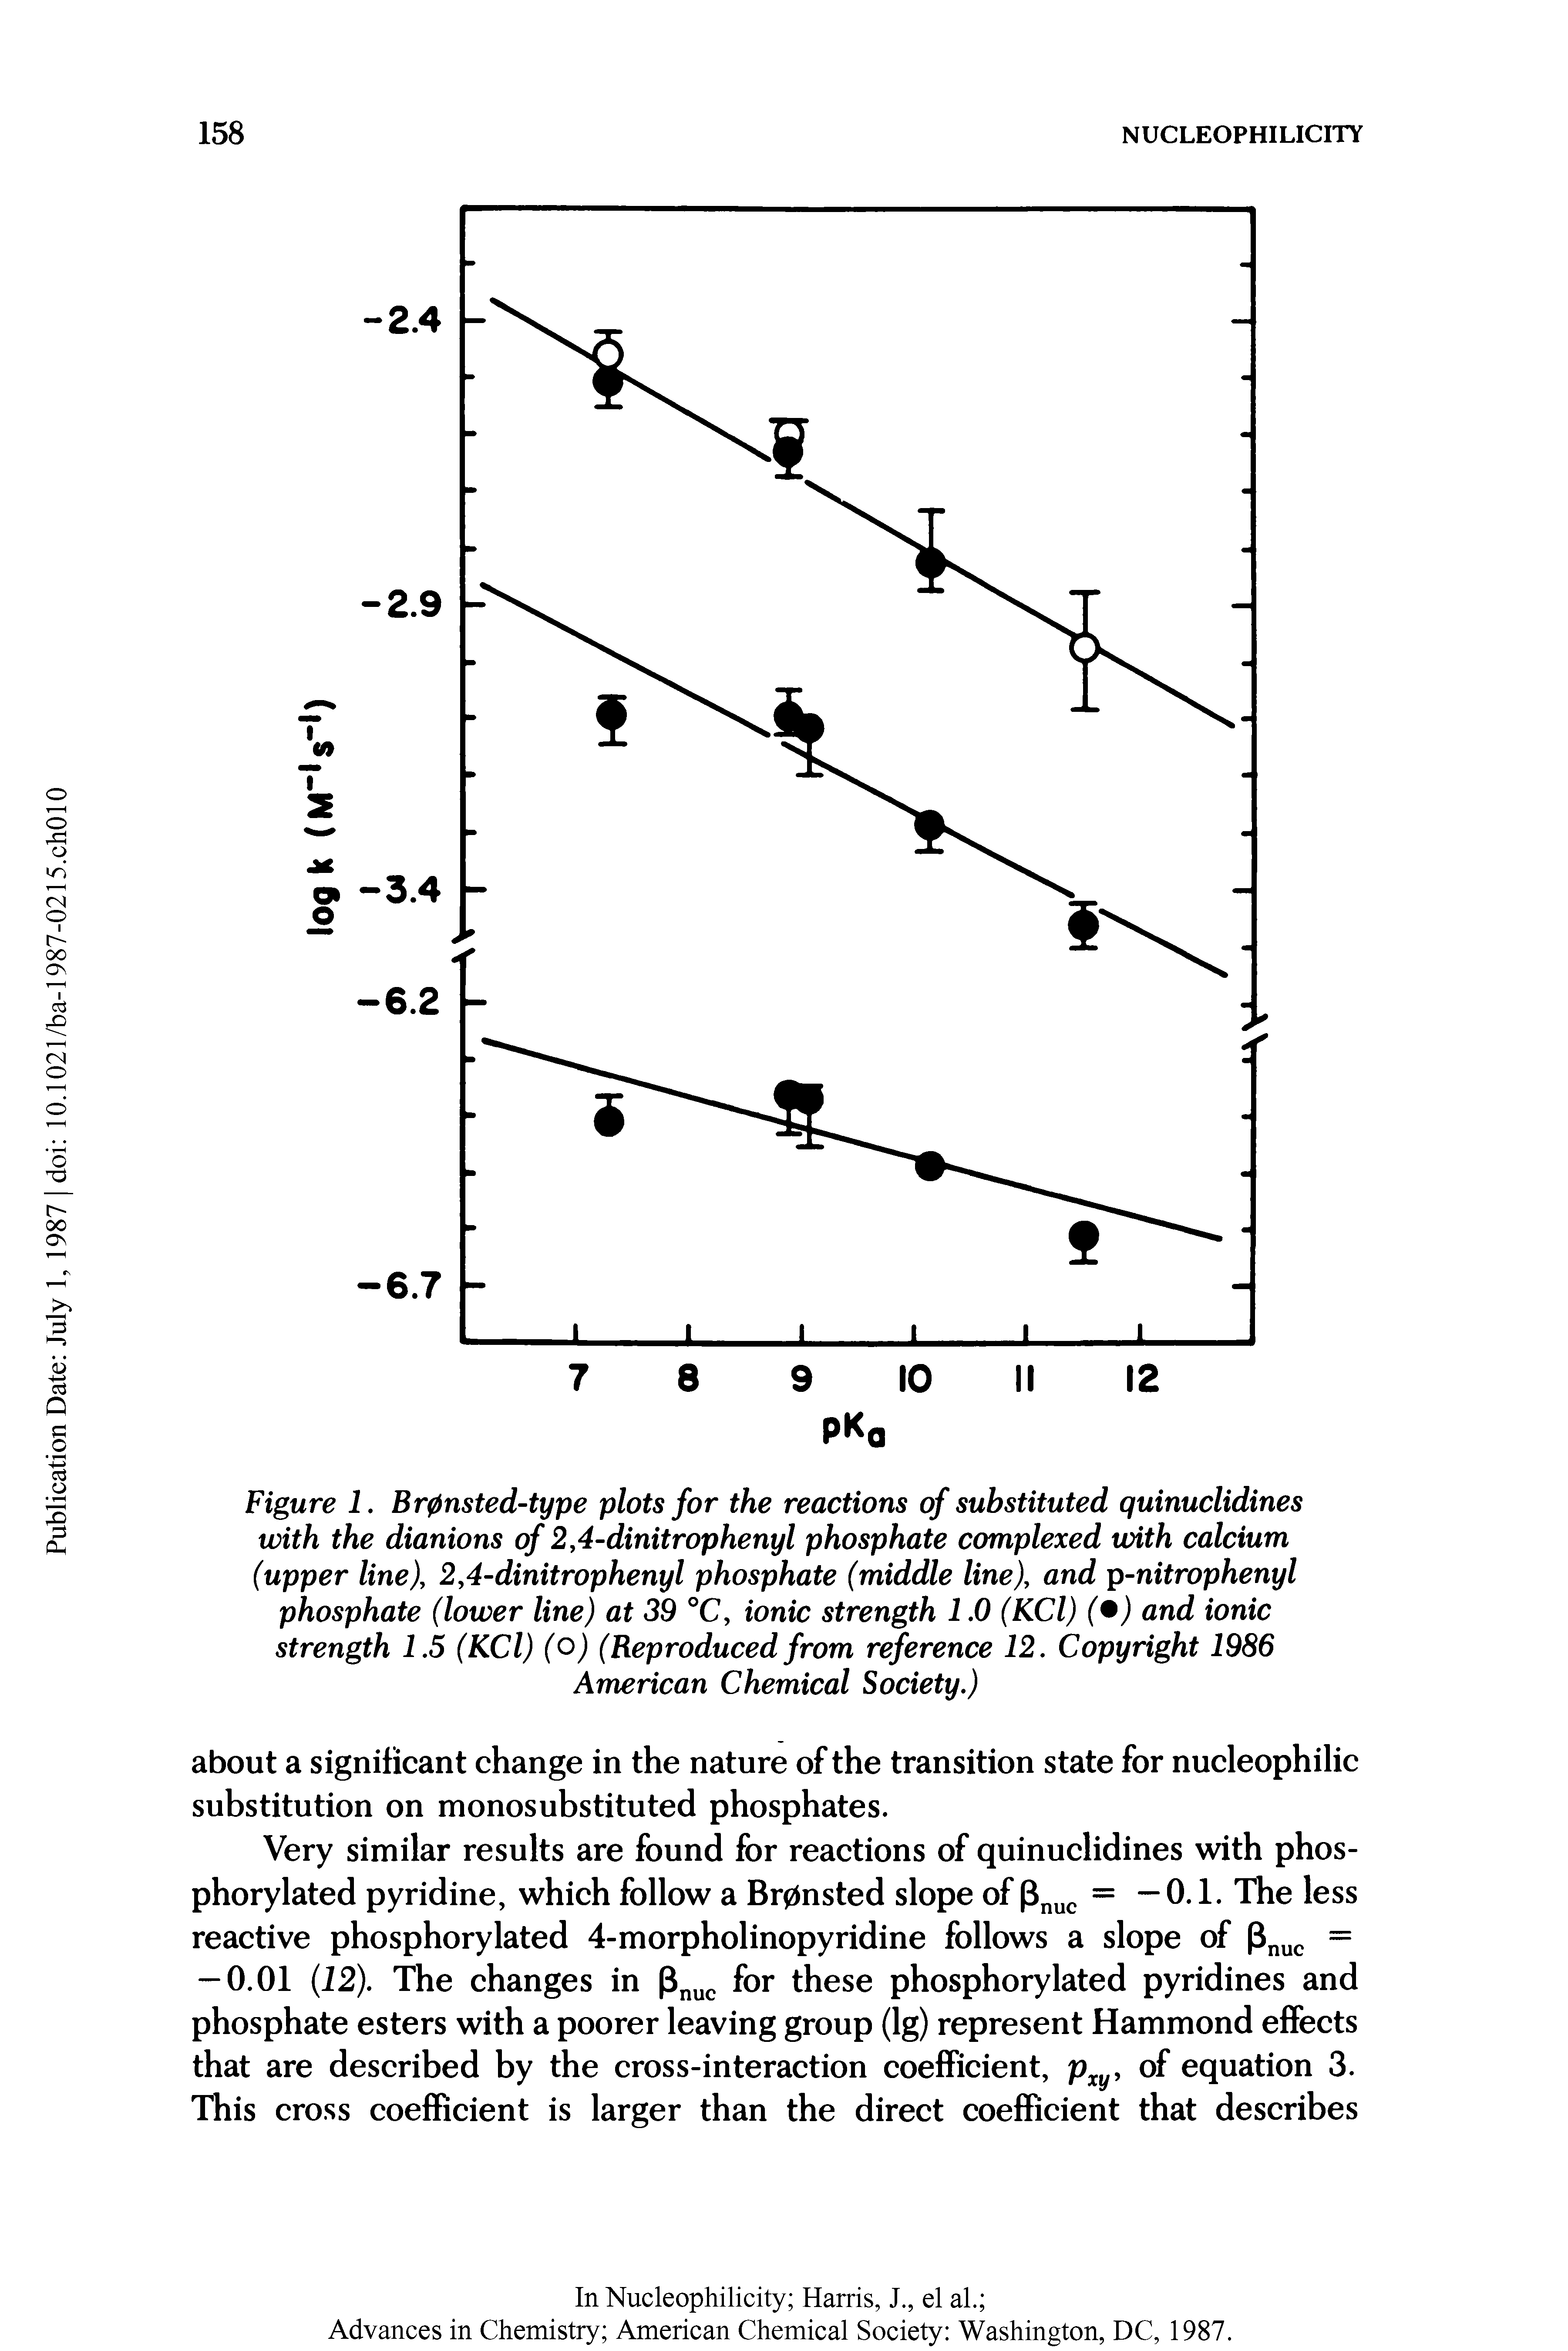 Figure 1. Br0nsted-type plots for the reactions of substituted quinuclidines with the dianions of 2,4-dinitrophenyl phosphate complexed with calcium (upper line), 2,4-dinitrophenyl phosphate (middle line), and p-nitrophenyl phosphate (lower line) at 39 °C, ionic strength 1.0 (KCl) ( ) and ionic strength 1.5 (KCl) (o) (Reproduced from reference 12. Copyright 1986 American Chemical Society.)...